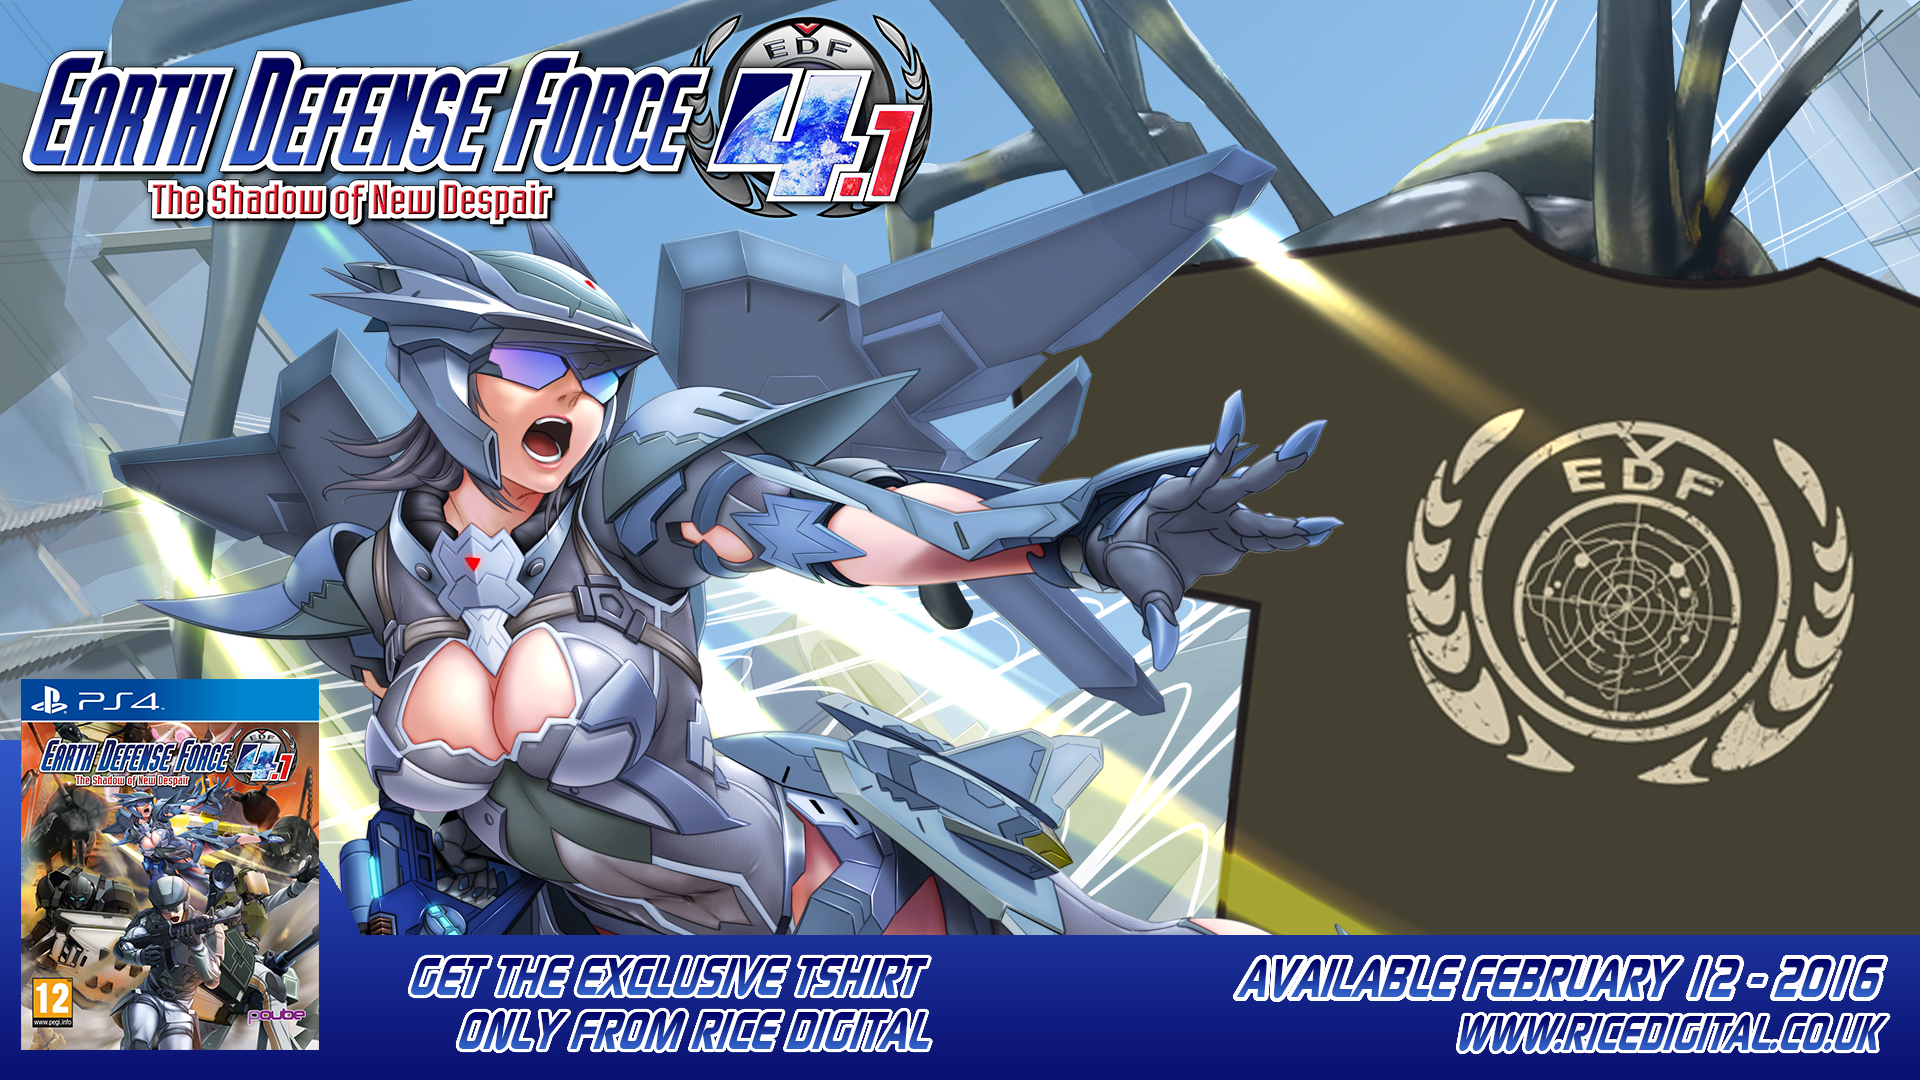 Earth Defense Force 4 1 Earth Defense Force 2 Europe Release Is 12th Feb Rice Digital